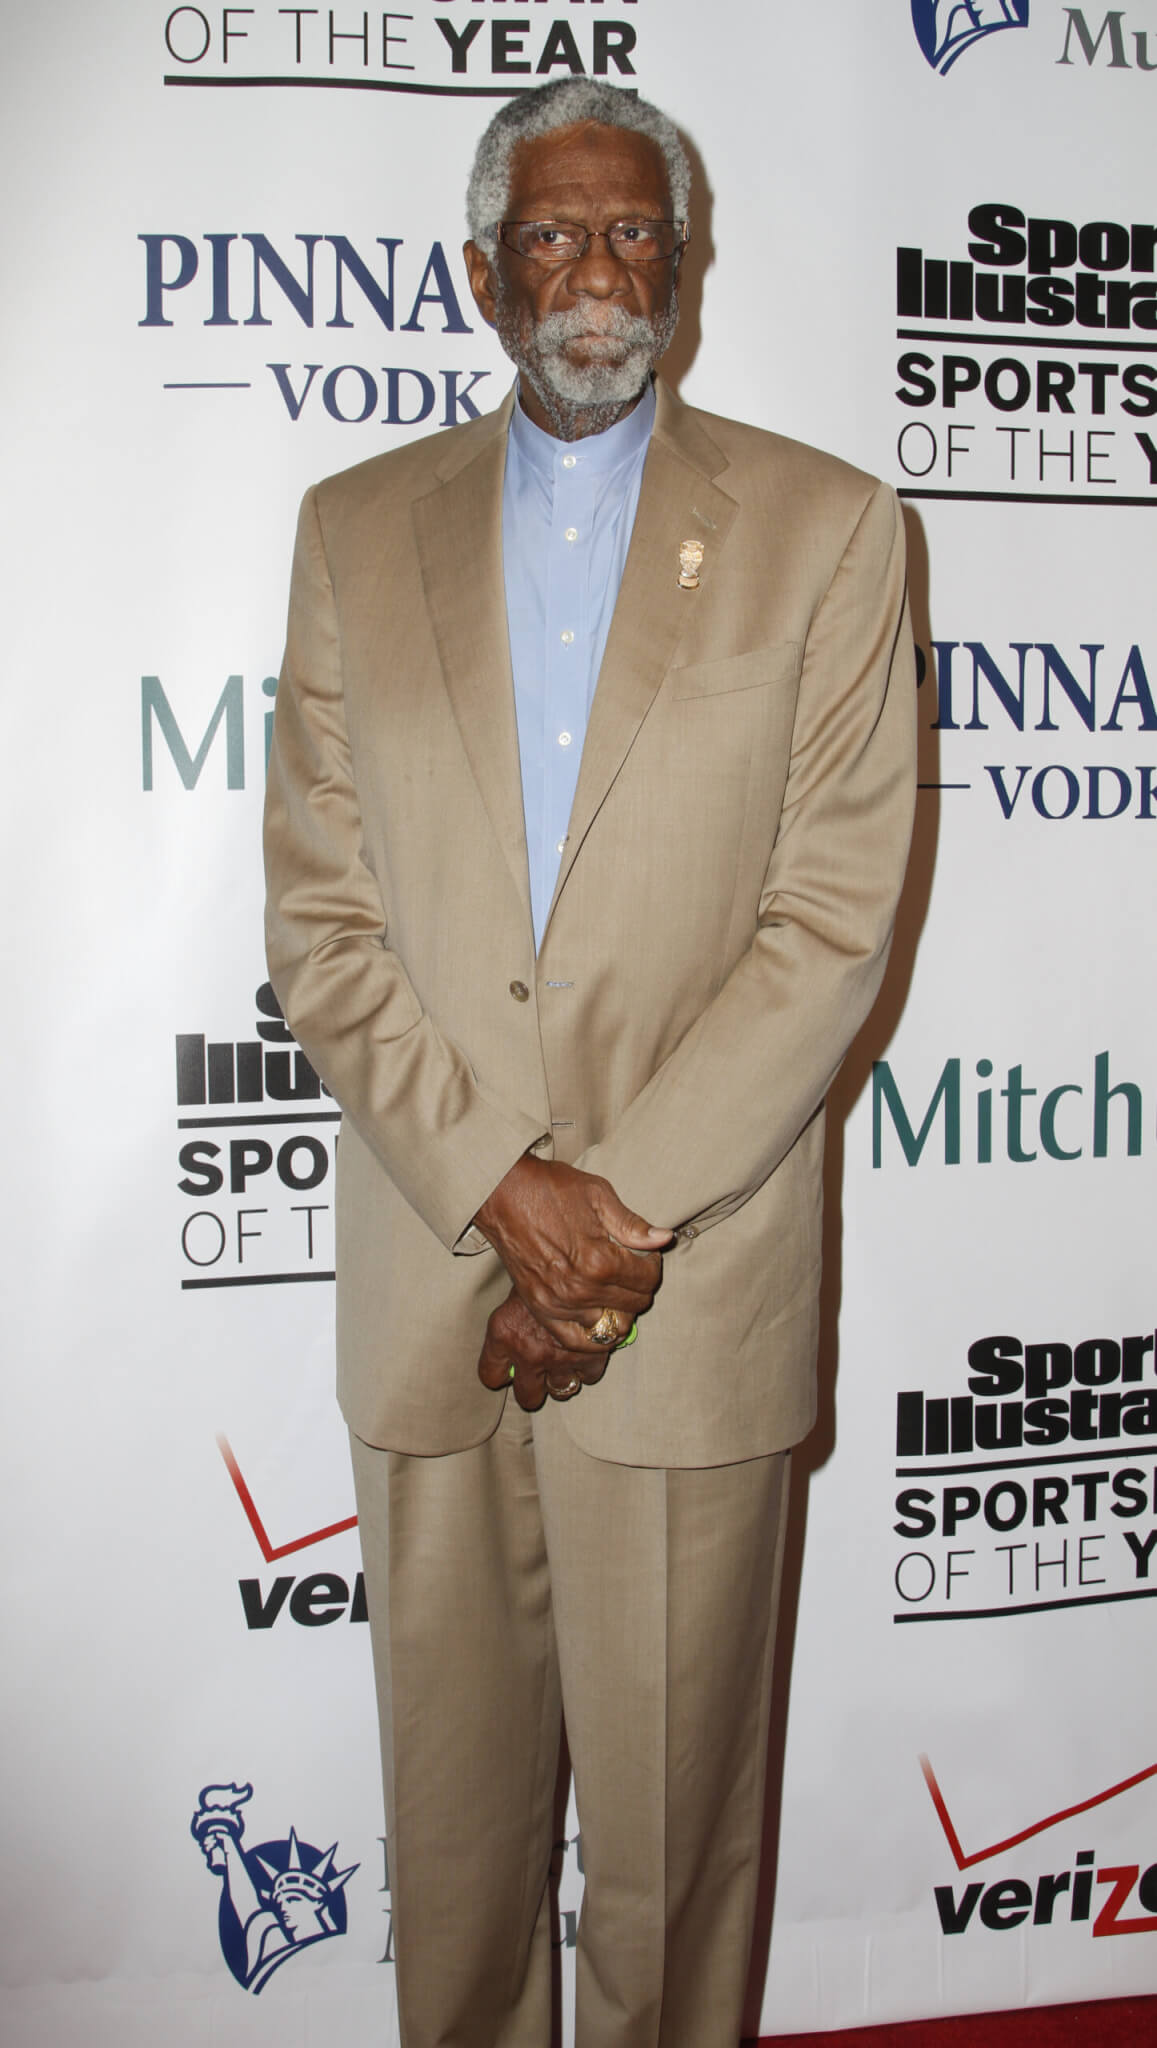 Bill Russell attends the Sports Illustrated Sportsman of the Year Awards 2010 in New York City